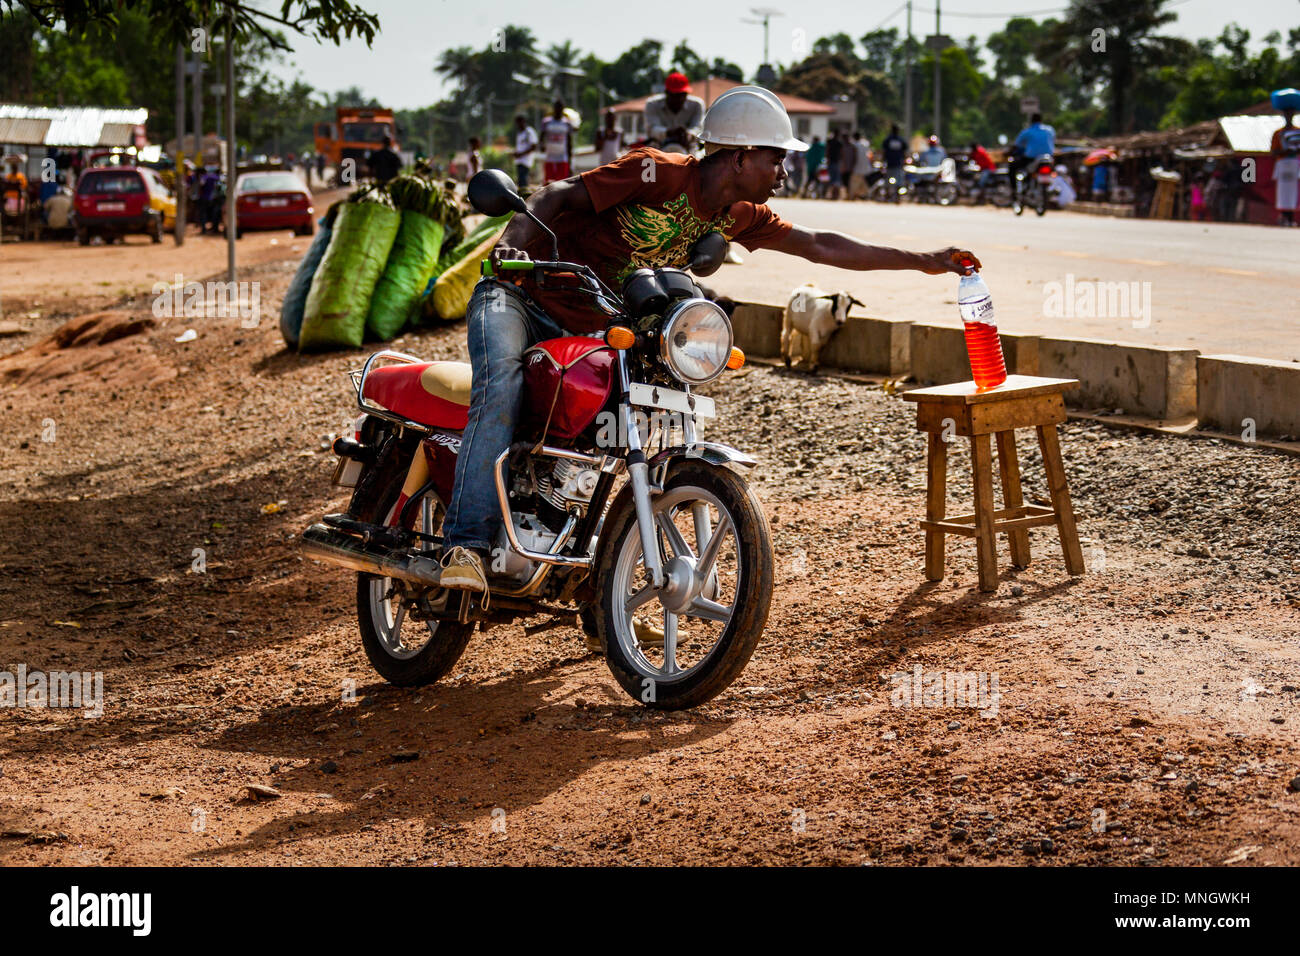 Yongoro, Sierra Leone - June 03, 2013: a bottle full of super petrol for refueling and an unknown man with a motorbike in the village in front of the  Stock Photo